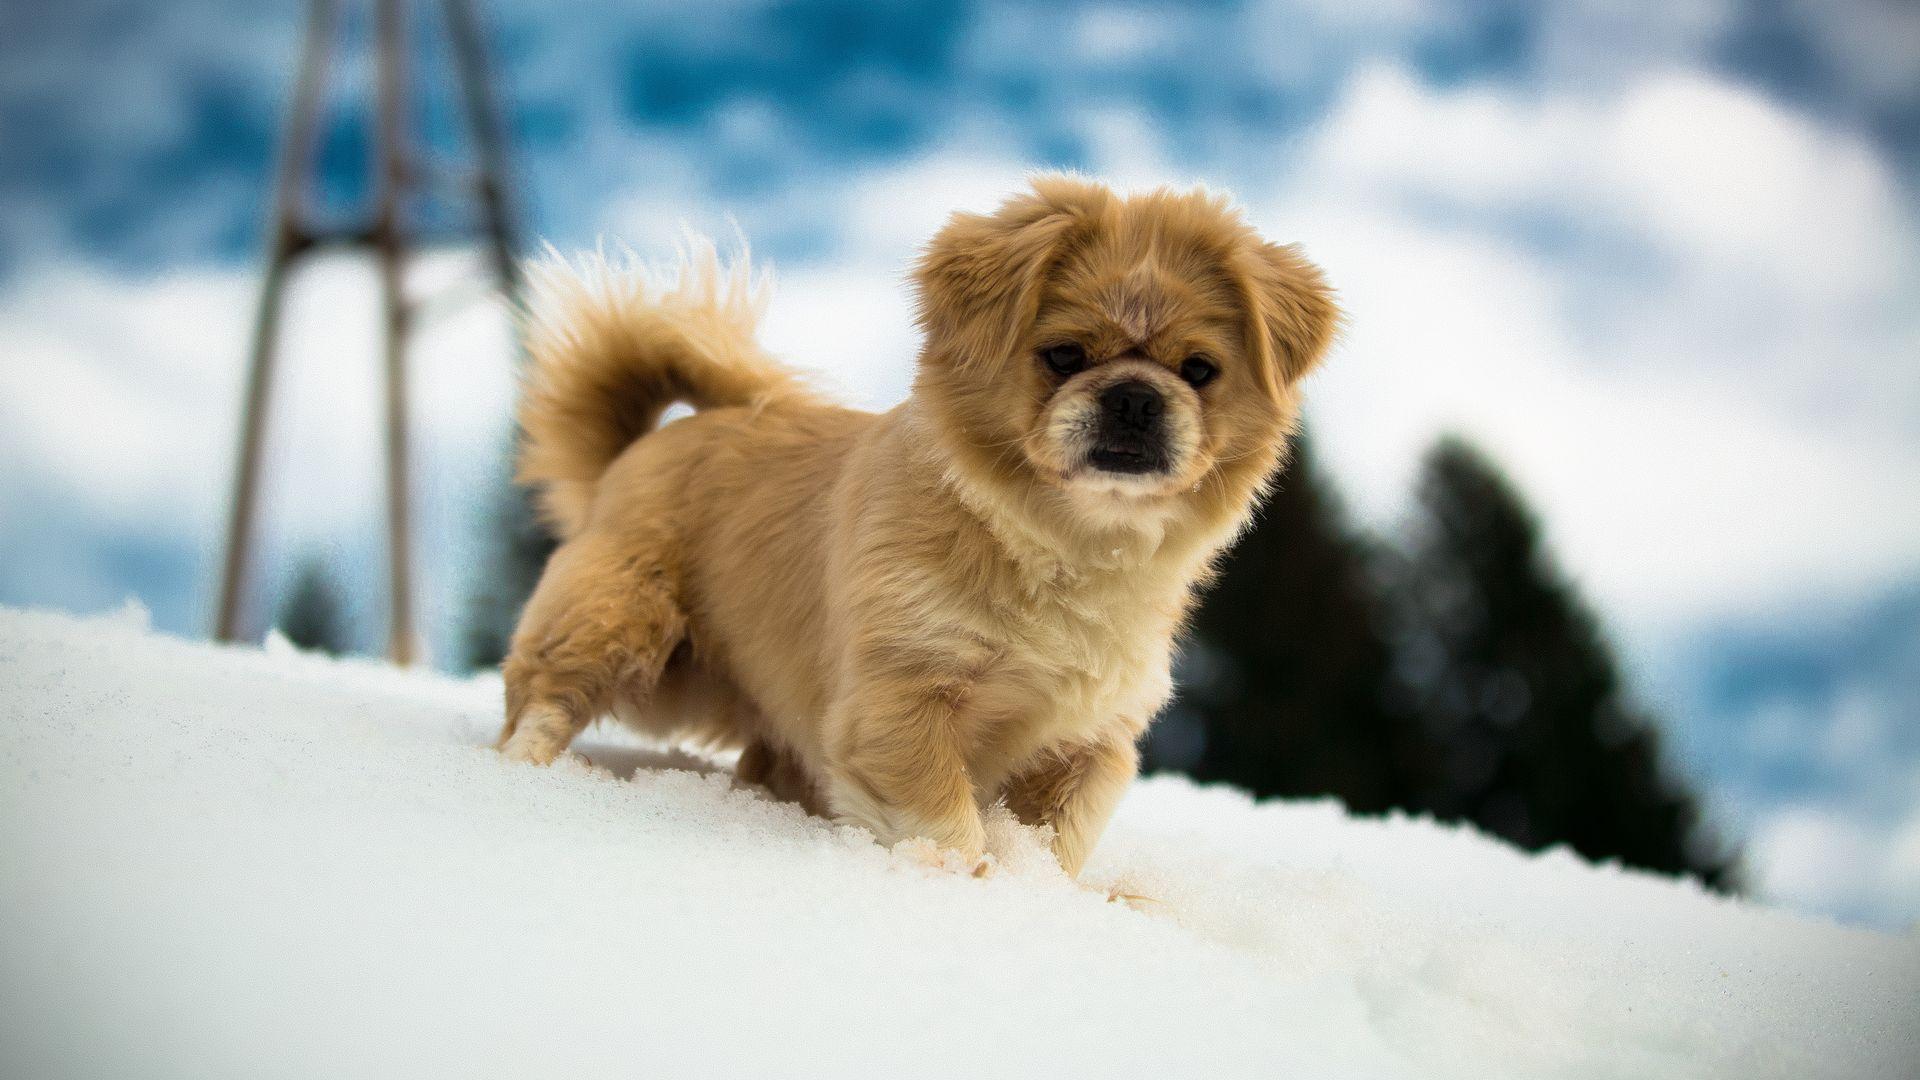 Puppies In The Snow Wallpapers Wallpaper Cave